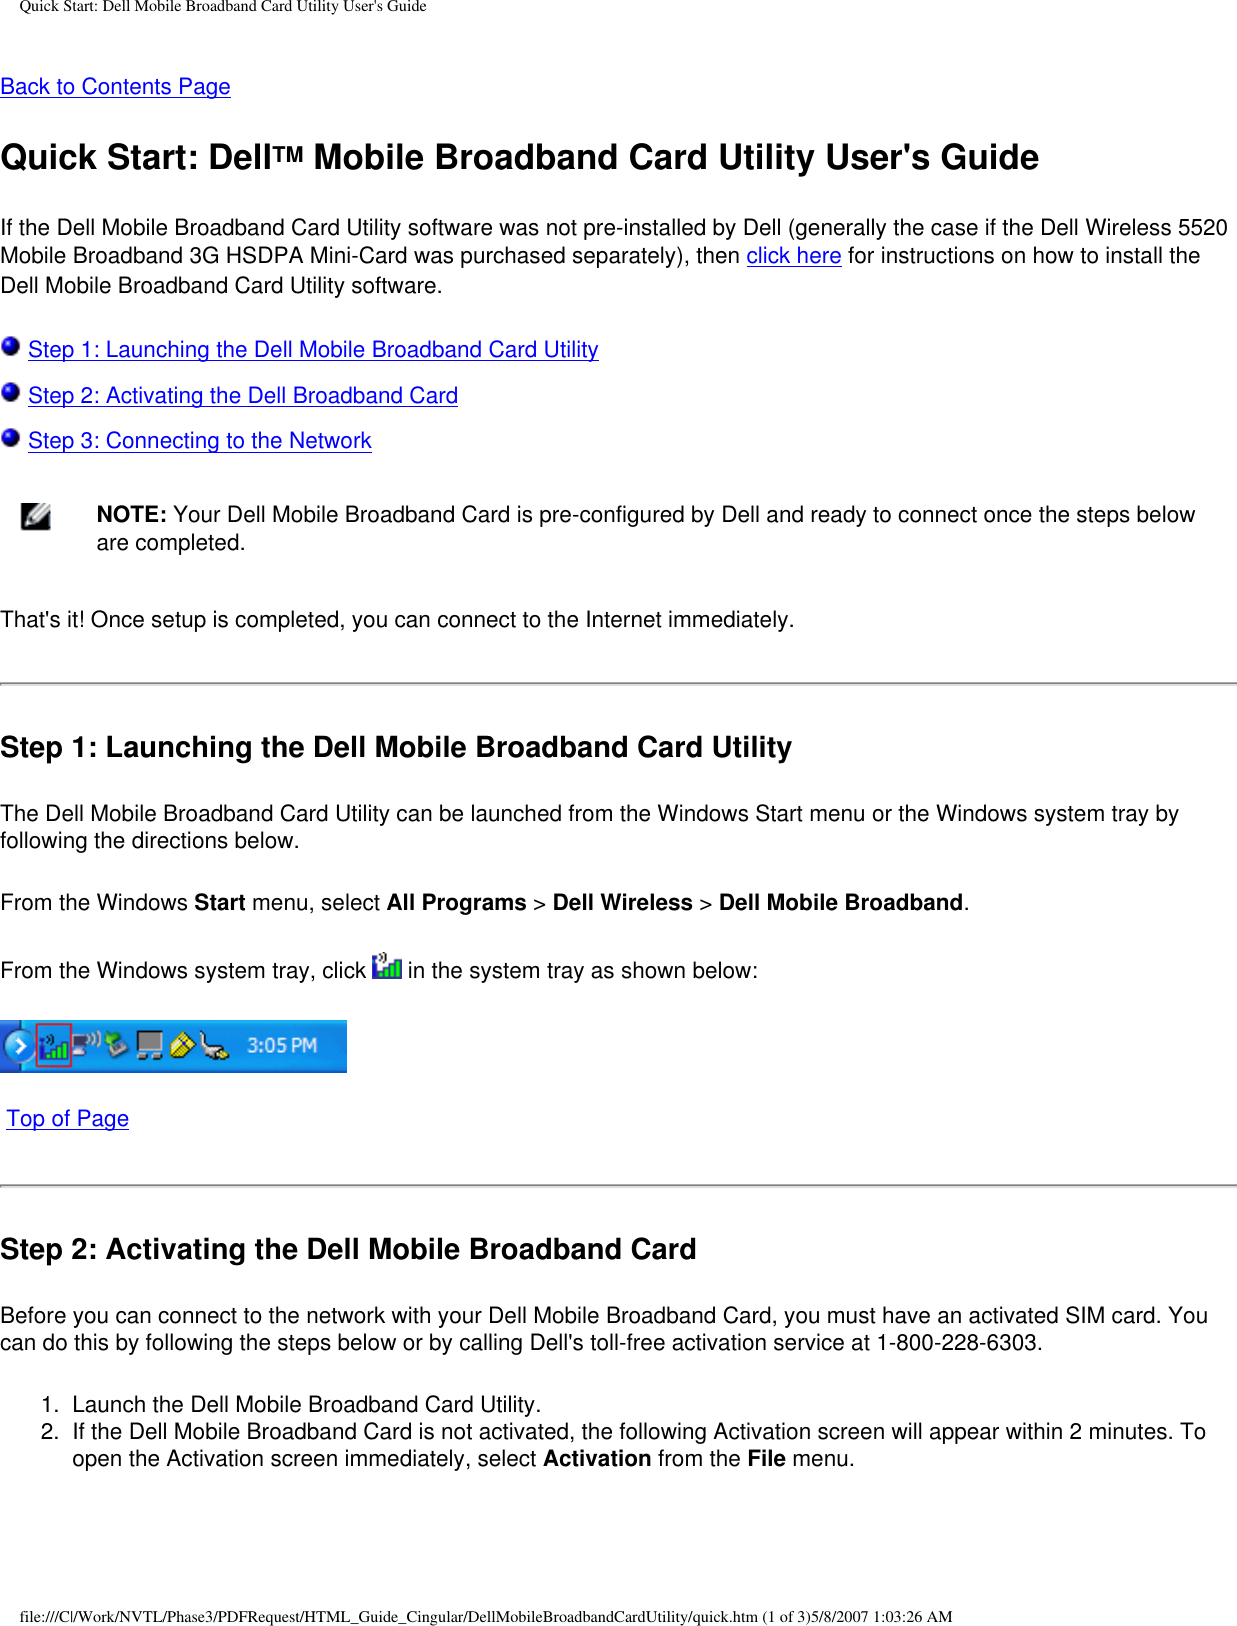 Quick Start: Dell Mobile Broadband Card Utility User&apos;s GuideBack to Contents Page Quick Start: DellTM Mobile Broadband Card Utility User&apos;s GuideIf the Dell Mobile Broadband Card Utility software was not pre-installed by Dell (generally the case if the Dell Wireless 5520 Mobile Broadband 3G HSDPA Mini-Card was purchased separately), then click here for instructions on how to install the Dell Mobile Broadband Card Utility software. Step 1: Launching the Dell Mobile Broadband Card Utility Step 2: Activating the Dell Broadband Card Step 3: Connecting to the Network    NOTE: Your Dell Mobile Broadband Card is pre-configured by Dell and ready to connect once the steps below are completed.That&apos;s it! Once setup is completed, you can connect to the Internet immediately.Step 1: Launching the Dell Mobile Broadband Card UtilityThe Dell Mobile Broadband Card Utility can be launched from the Windows Start menu or the Windows system tray by following the directions below.From the Windows Start menu, select All Programs &gt; Dell Wireless &gt; Dell Mobile Broadband. From the Windows system tray, click   in the system tray as shown below:  Top of PageStep 2: Activating the Dell Mobile Broadband CardBefore you can connect to the network with your Dell Mobile Broadband Card, you must have an activated SIM card. You can do this by following the steps below or by calling Dell&apos;s toll-free activation service at 1-800-228-6303.1.  Launch the Dell Mobile Broadband Card Utility.2.  If the Dell Mobile Broadband Card is not activated, the following Activation screen will appear within 2 minutes. To open the Activation screen immediately, select Activation from the File menu.file:///C|/Work/NVTL/Phase3/PDFRequest/HTML_Guide_Cingular/DellMobileBroadbandCardUtility/quick.htm (1 of 3)5/8/2007 1:03:26 AM